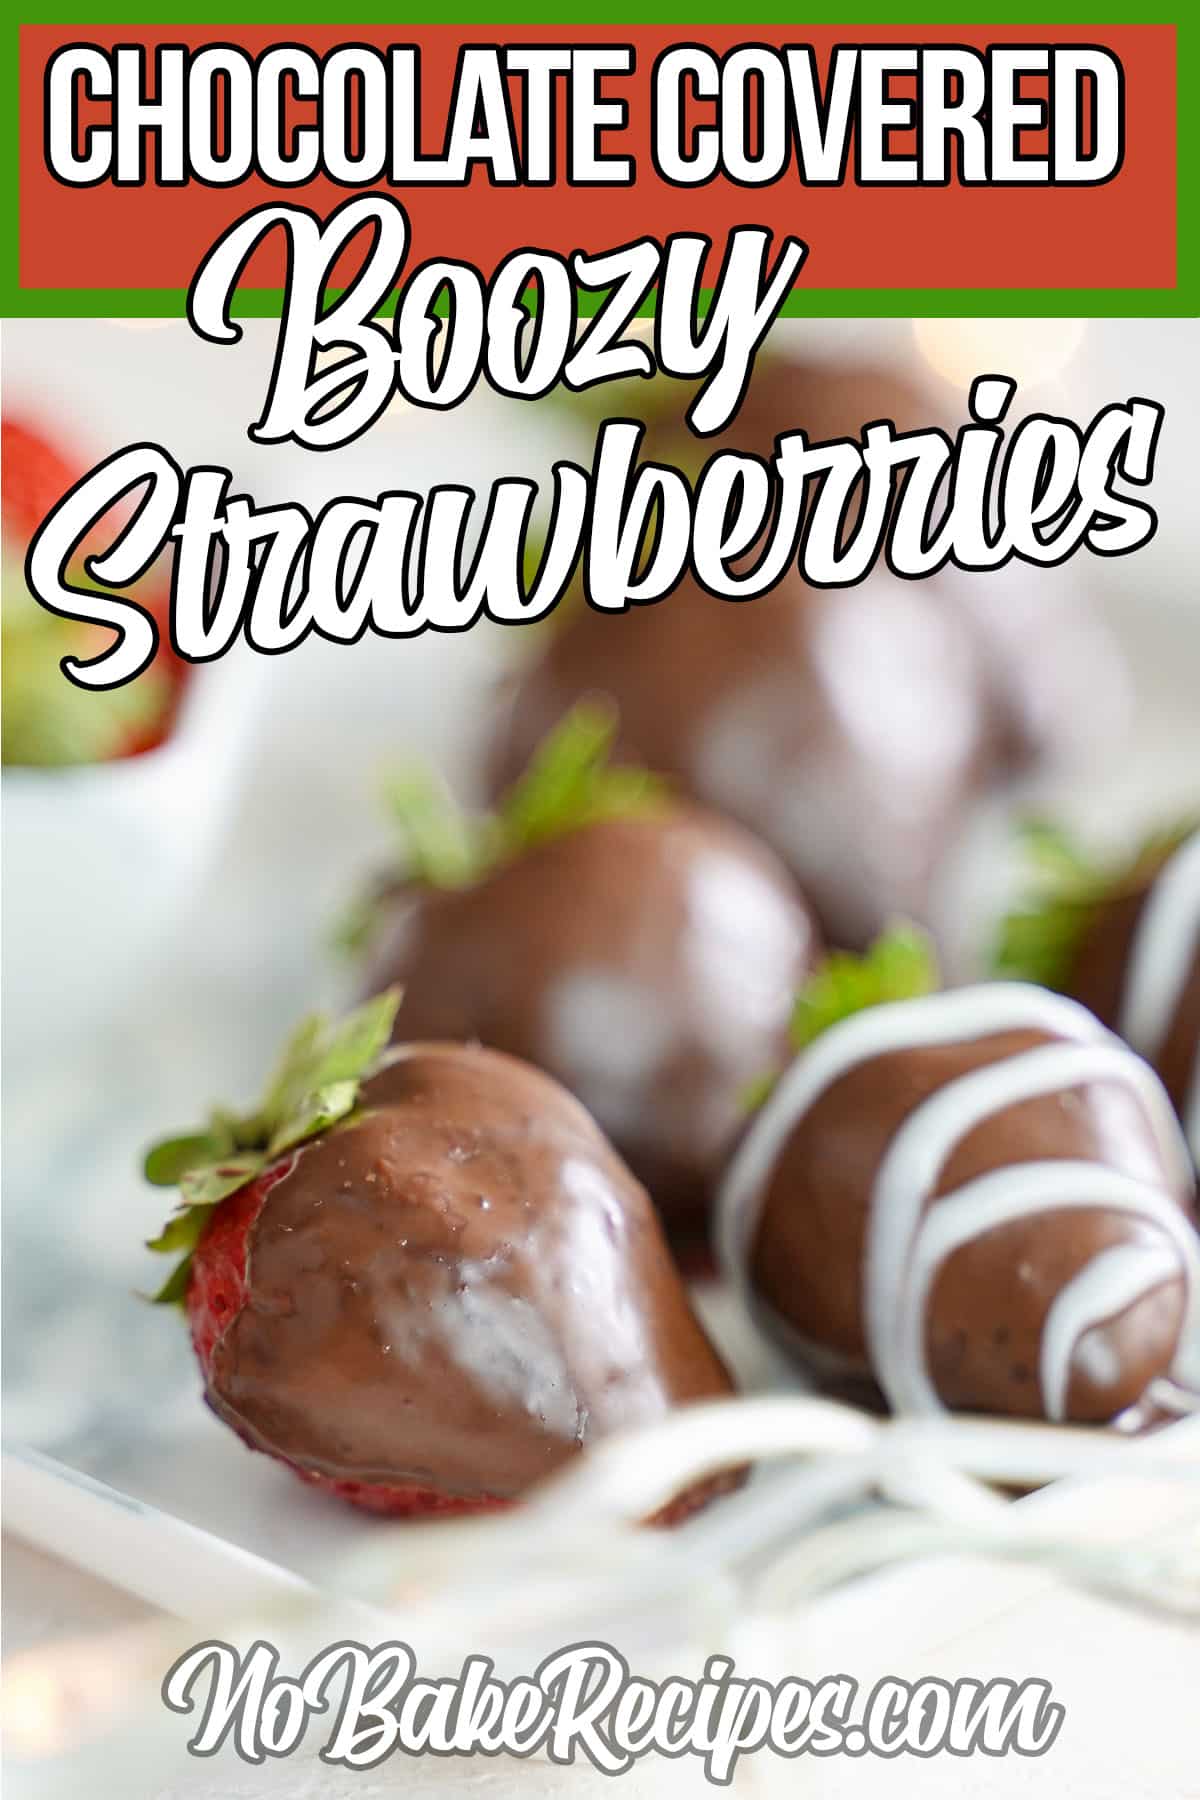 plate of chocolate strawberries with text which reads chocolate covered boozy strawberries